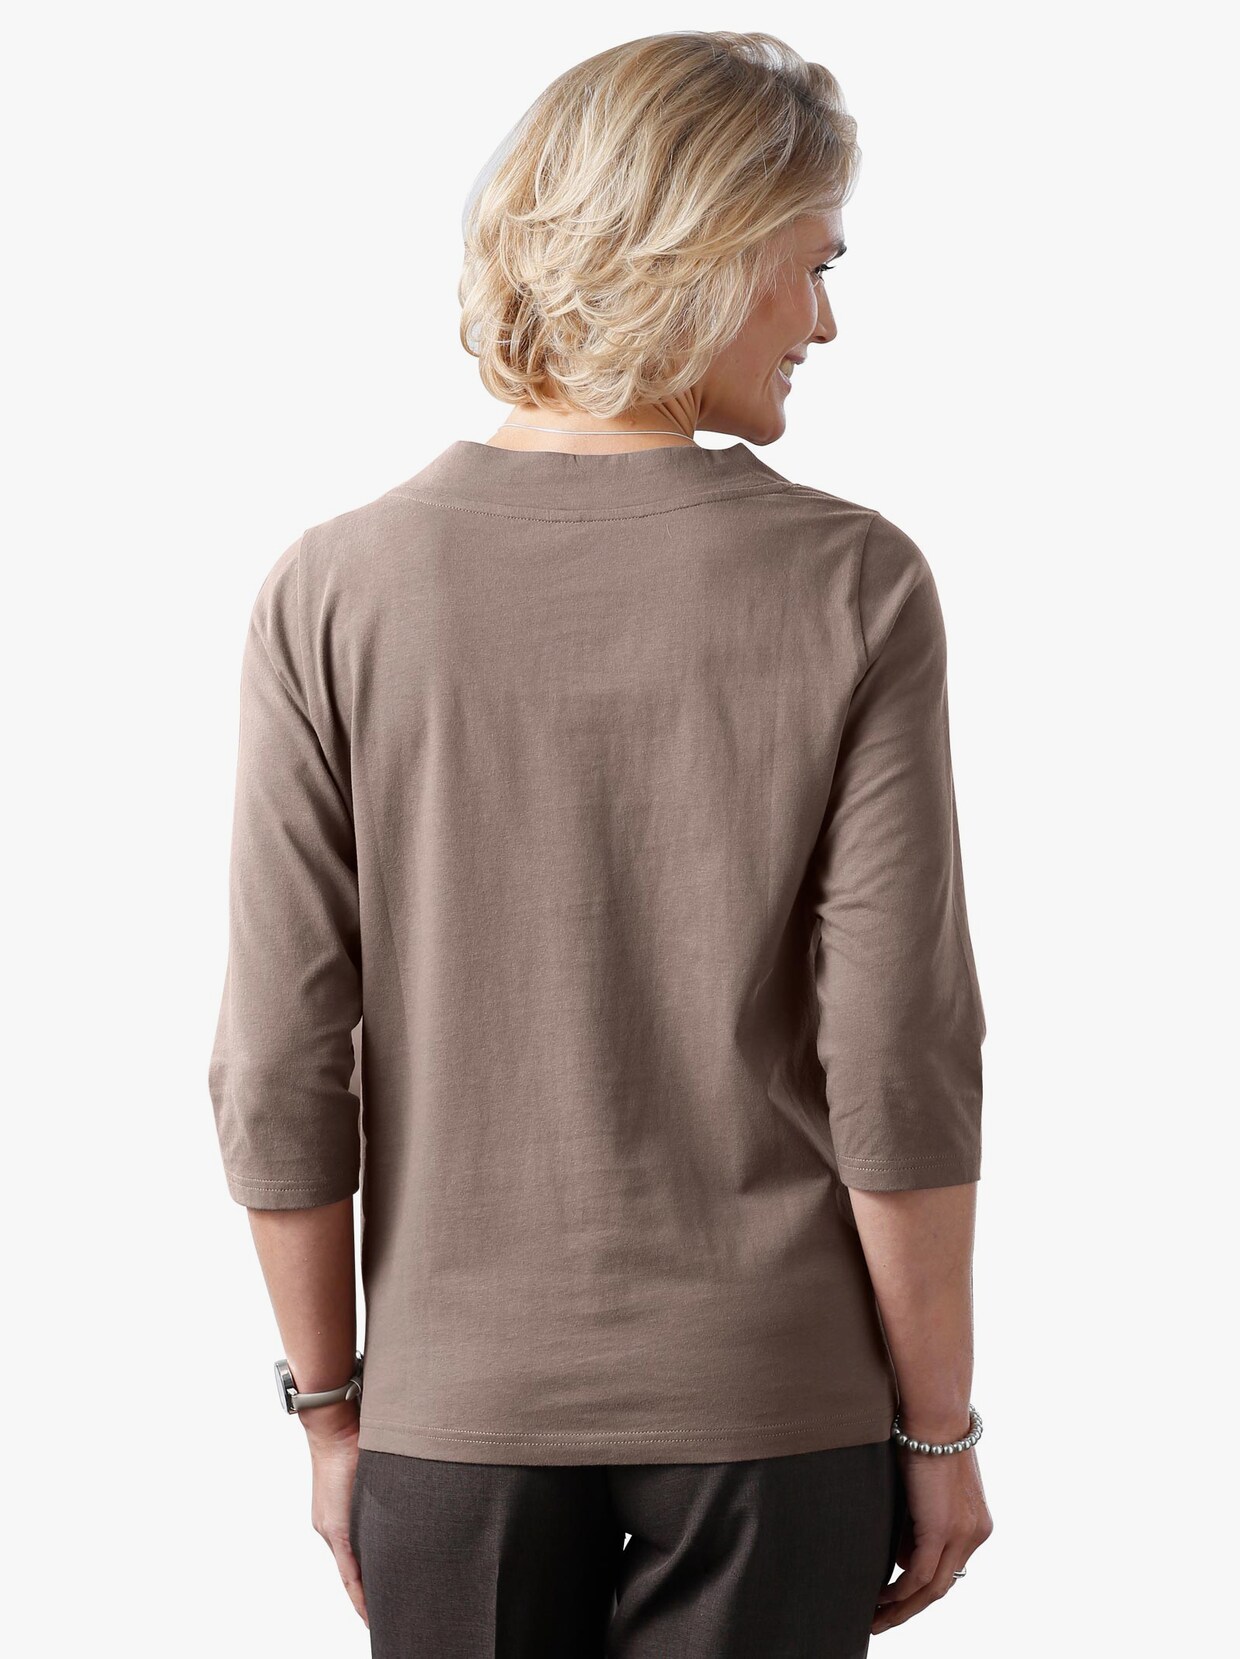 2-in-1-shirt - donkertaupe